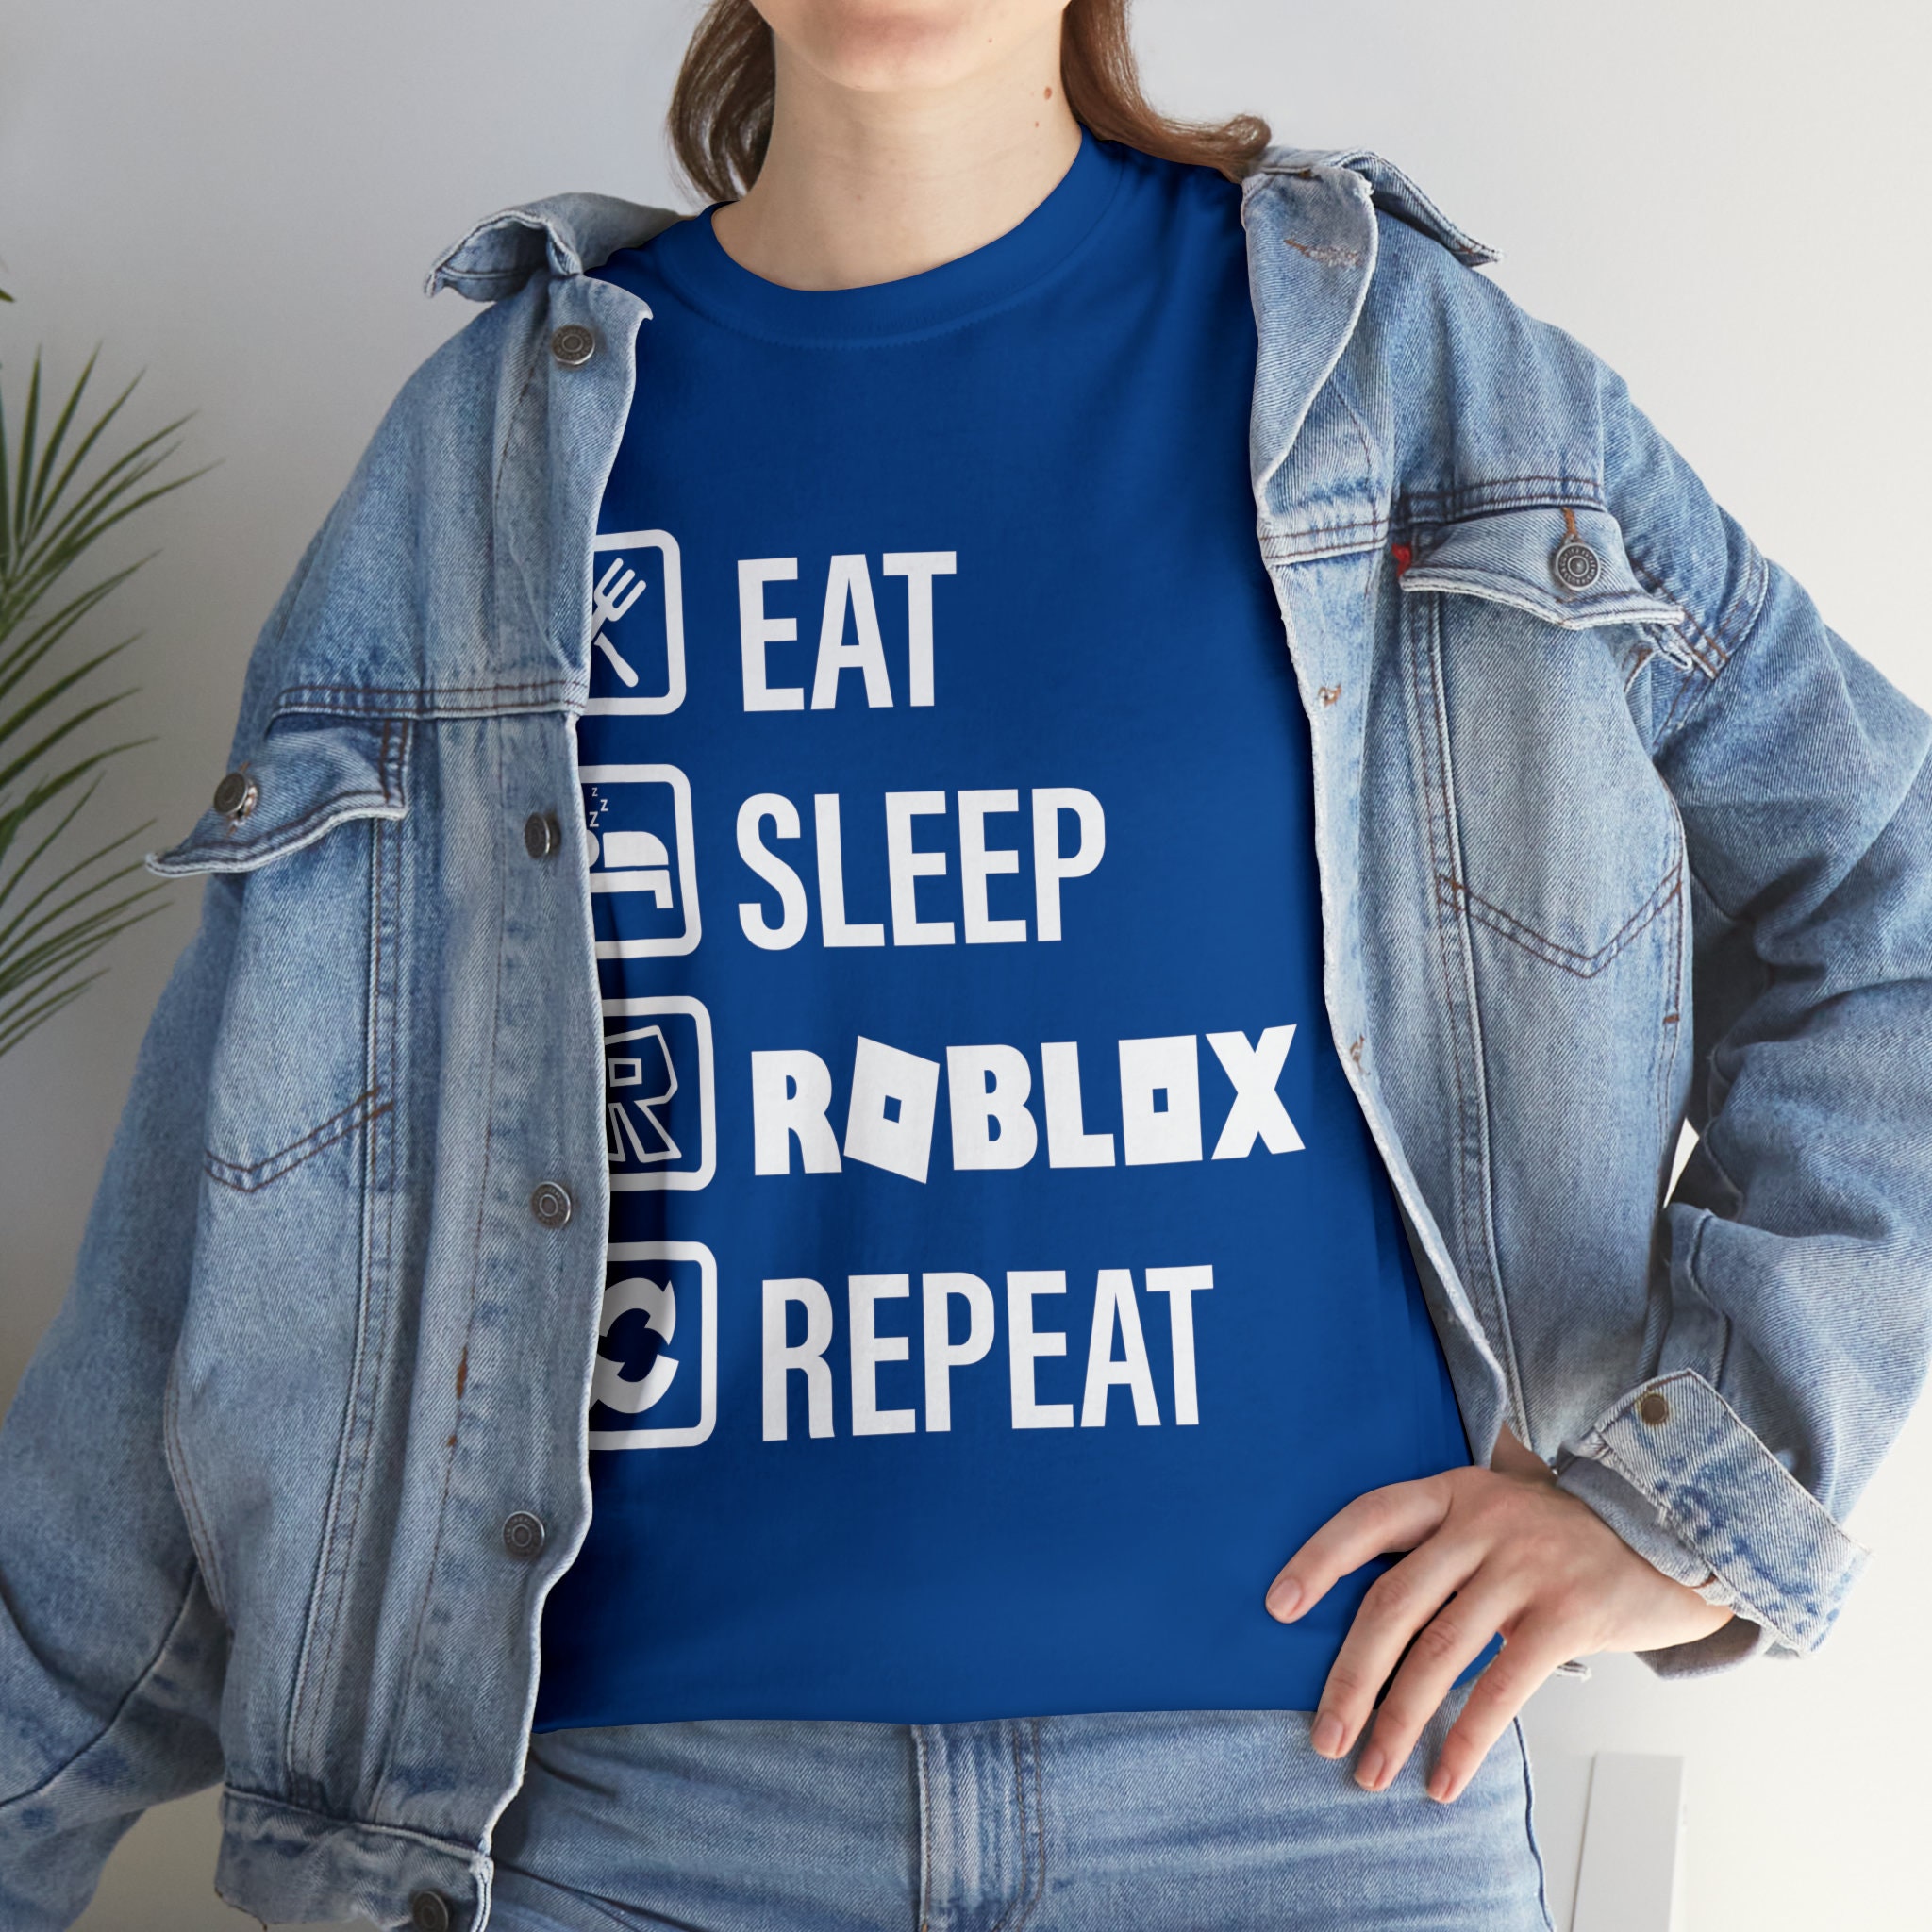 TO HELP WITH ME MAKING T-SHIRTS - Roblox